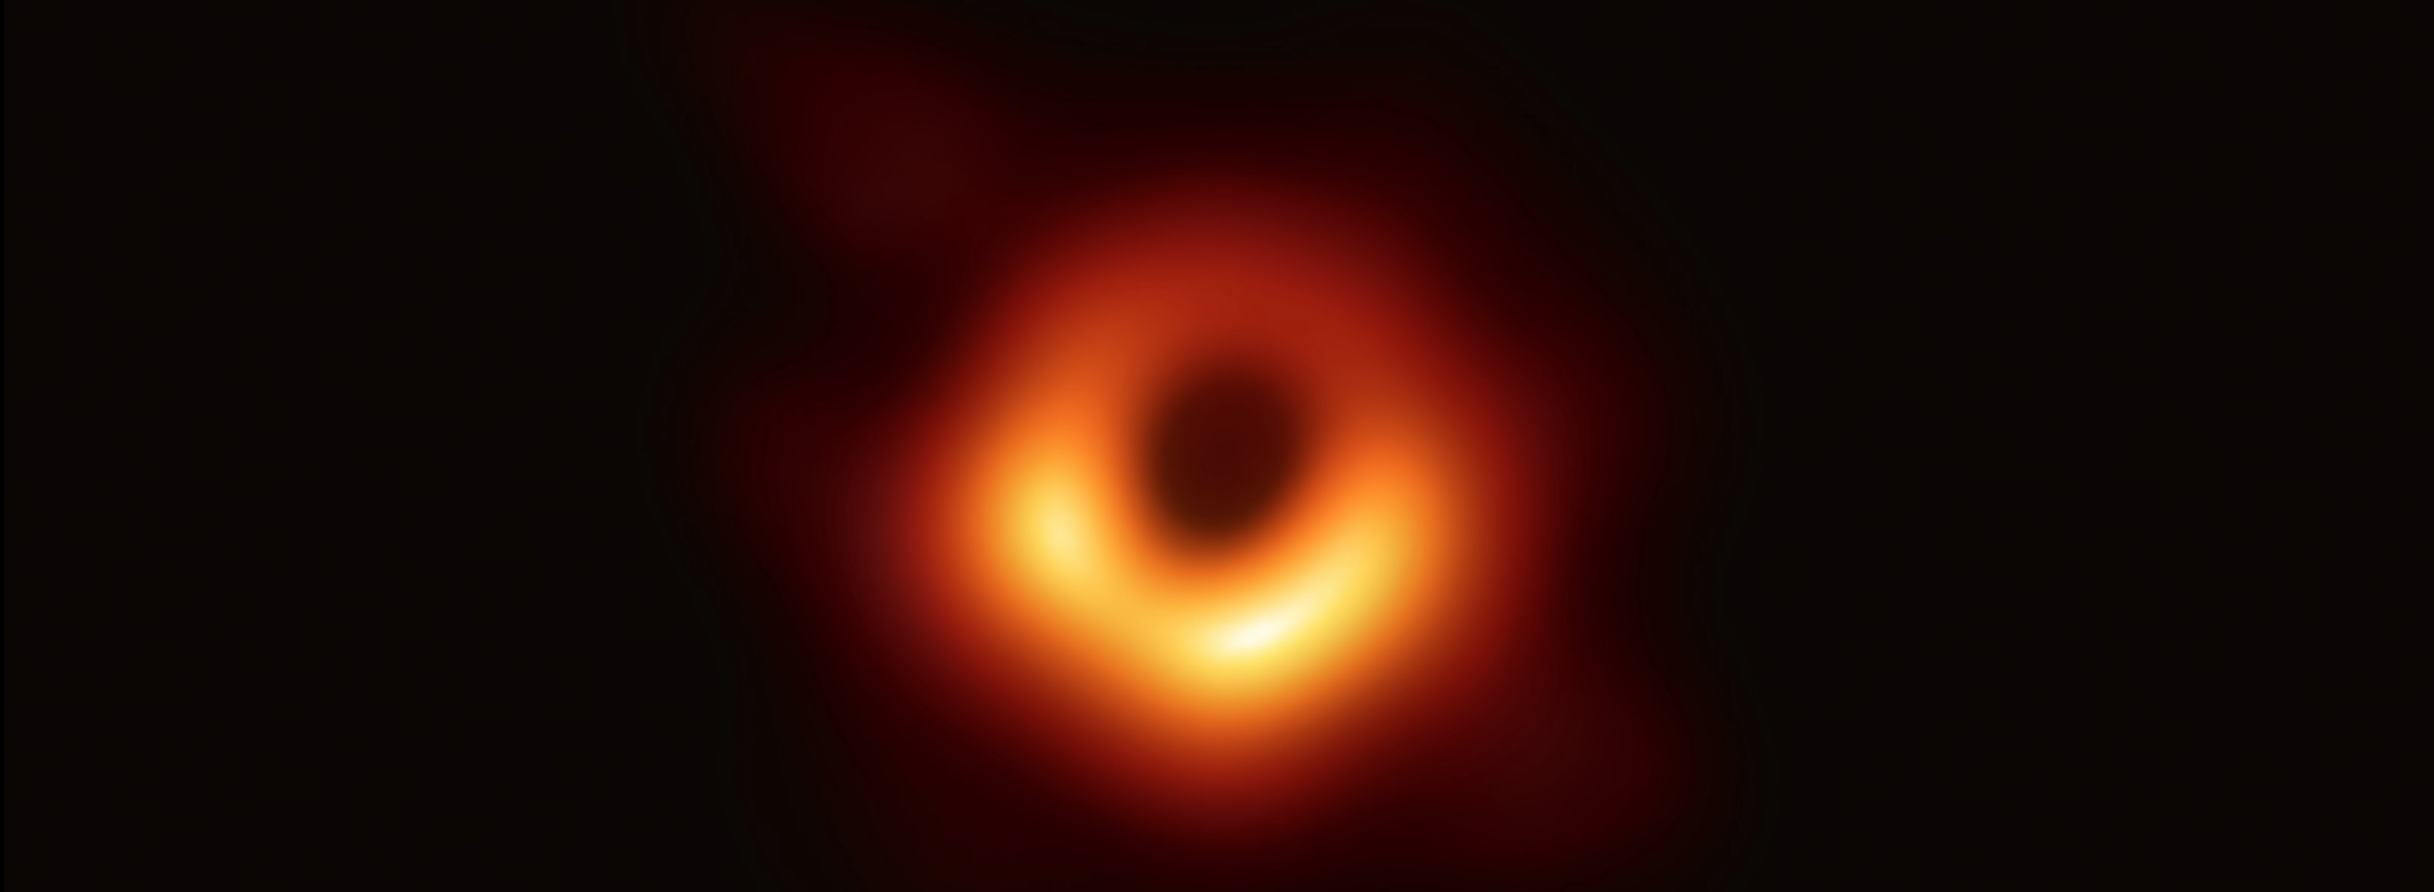 Congrats to all parties involved in creating the first ever picture of a black hole